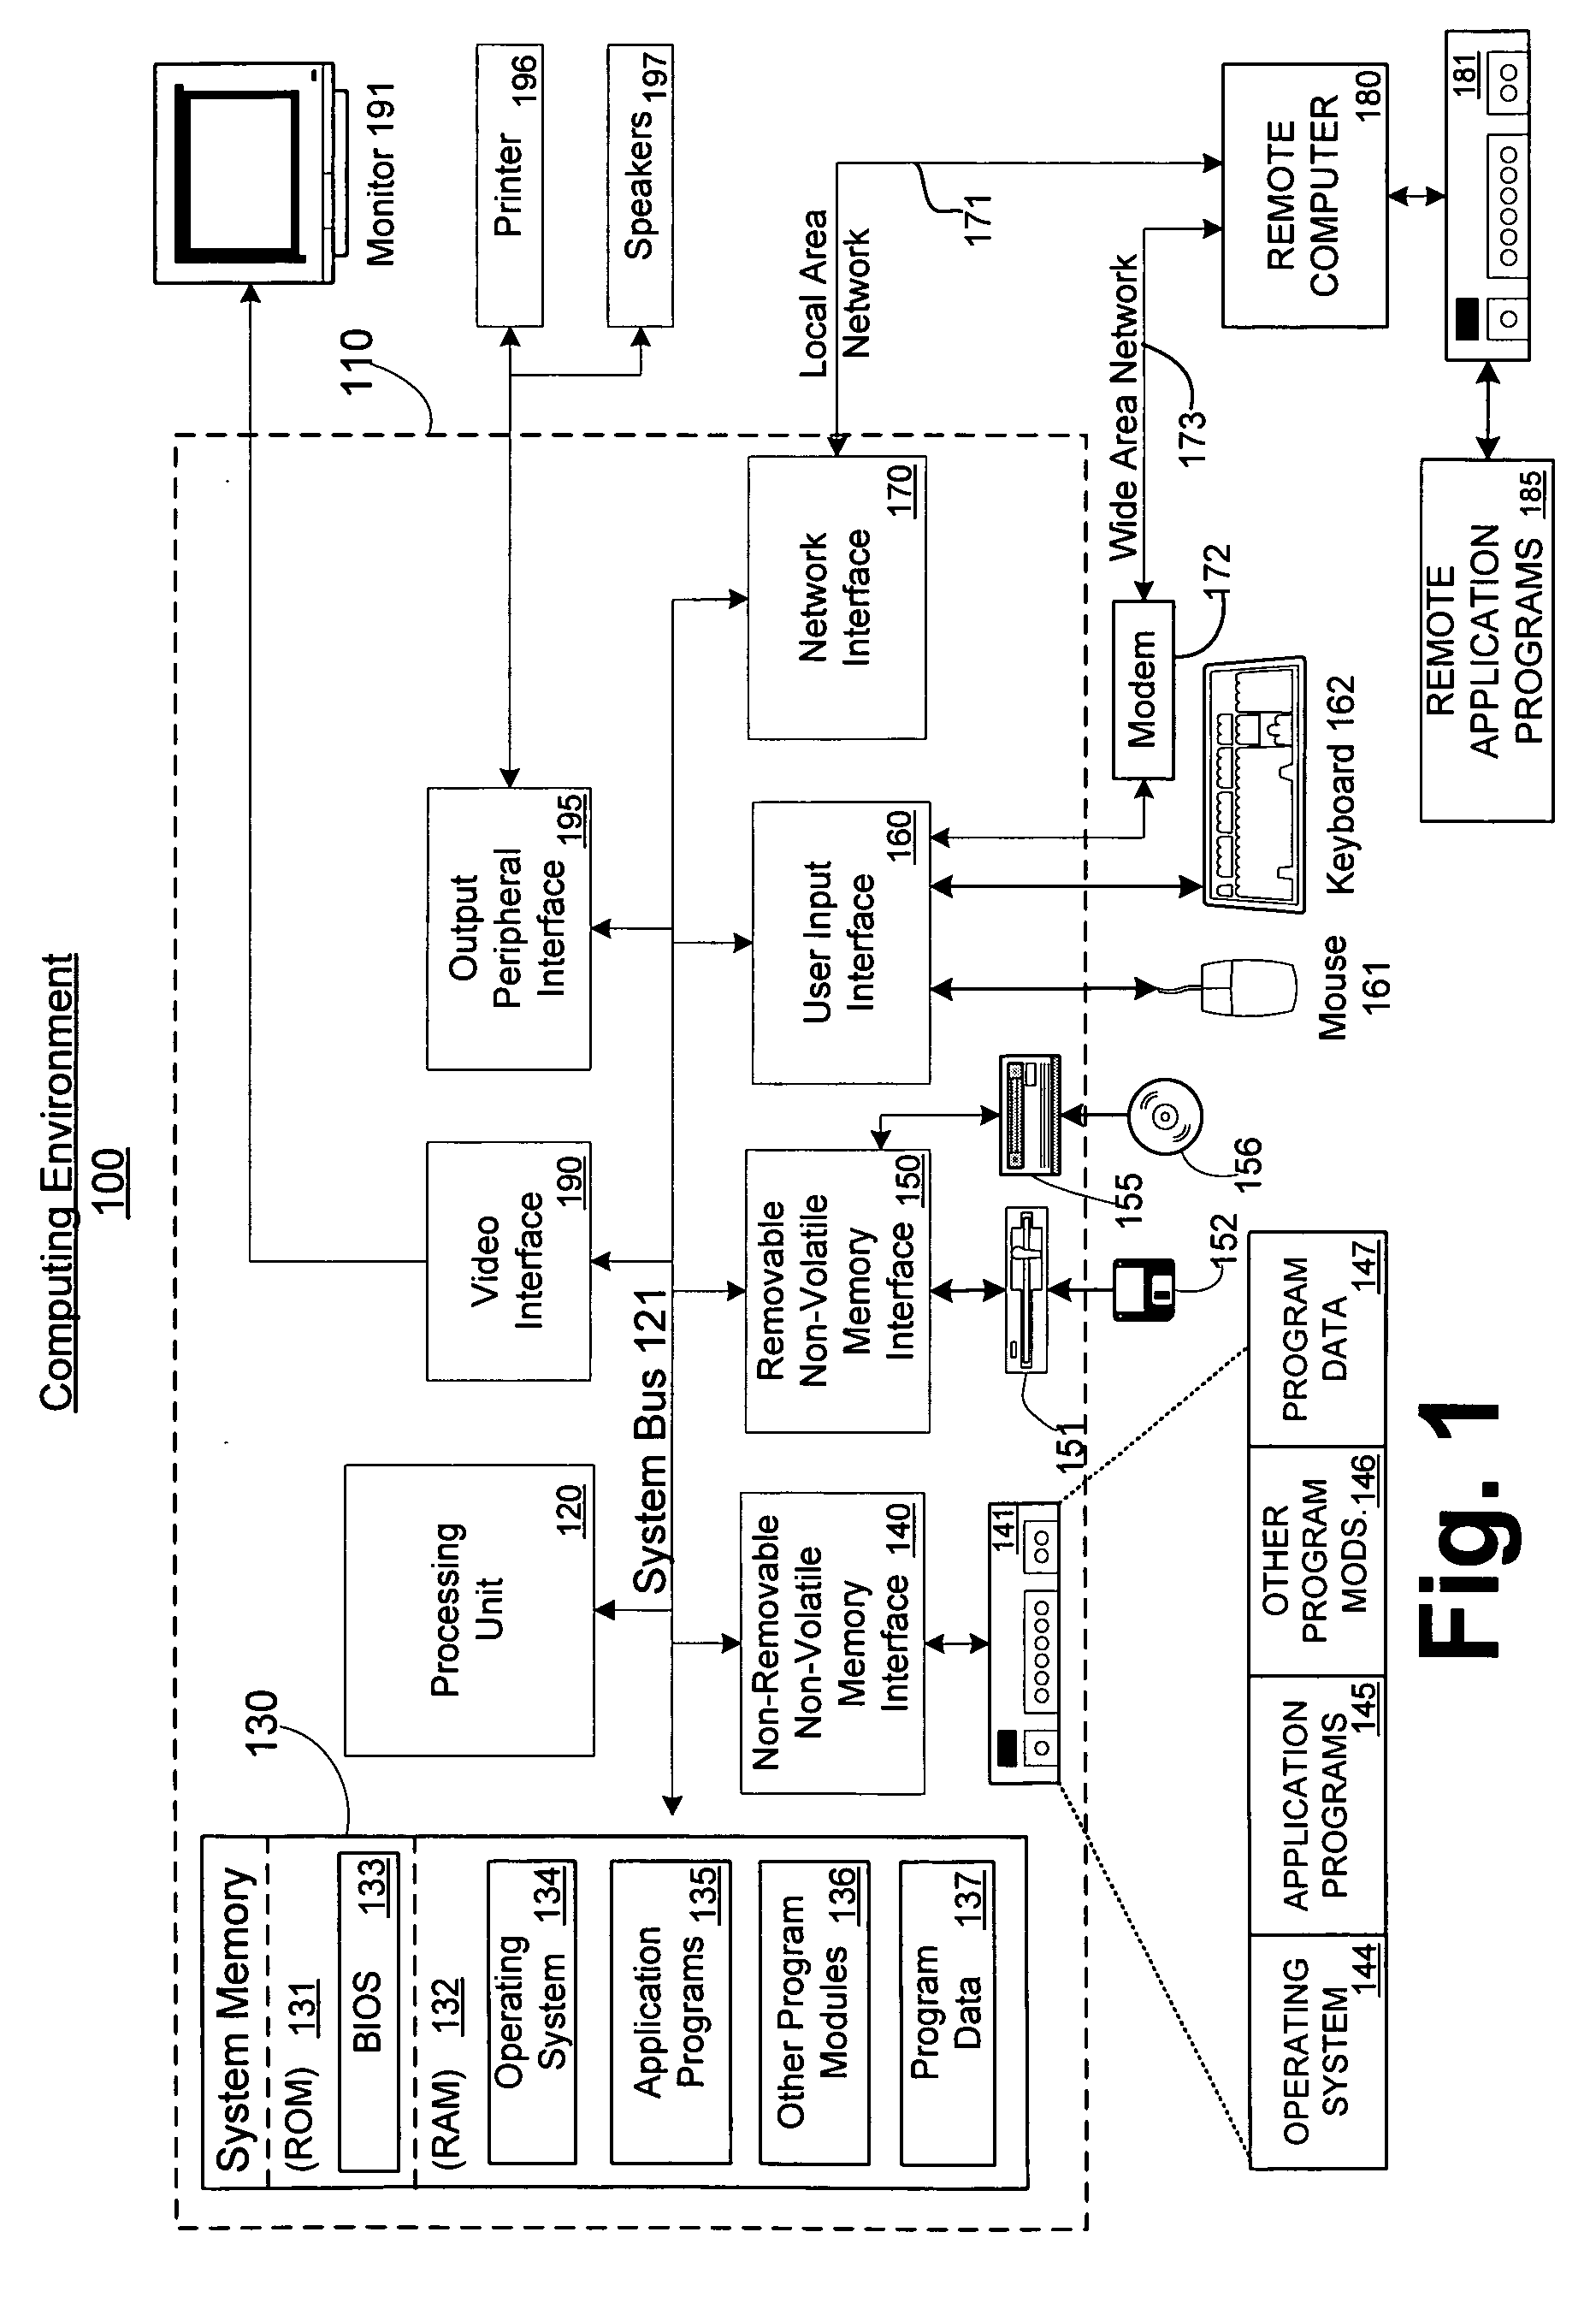 User interface mechanism to formulate complex query against an entity relationship model